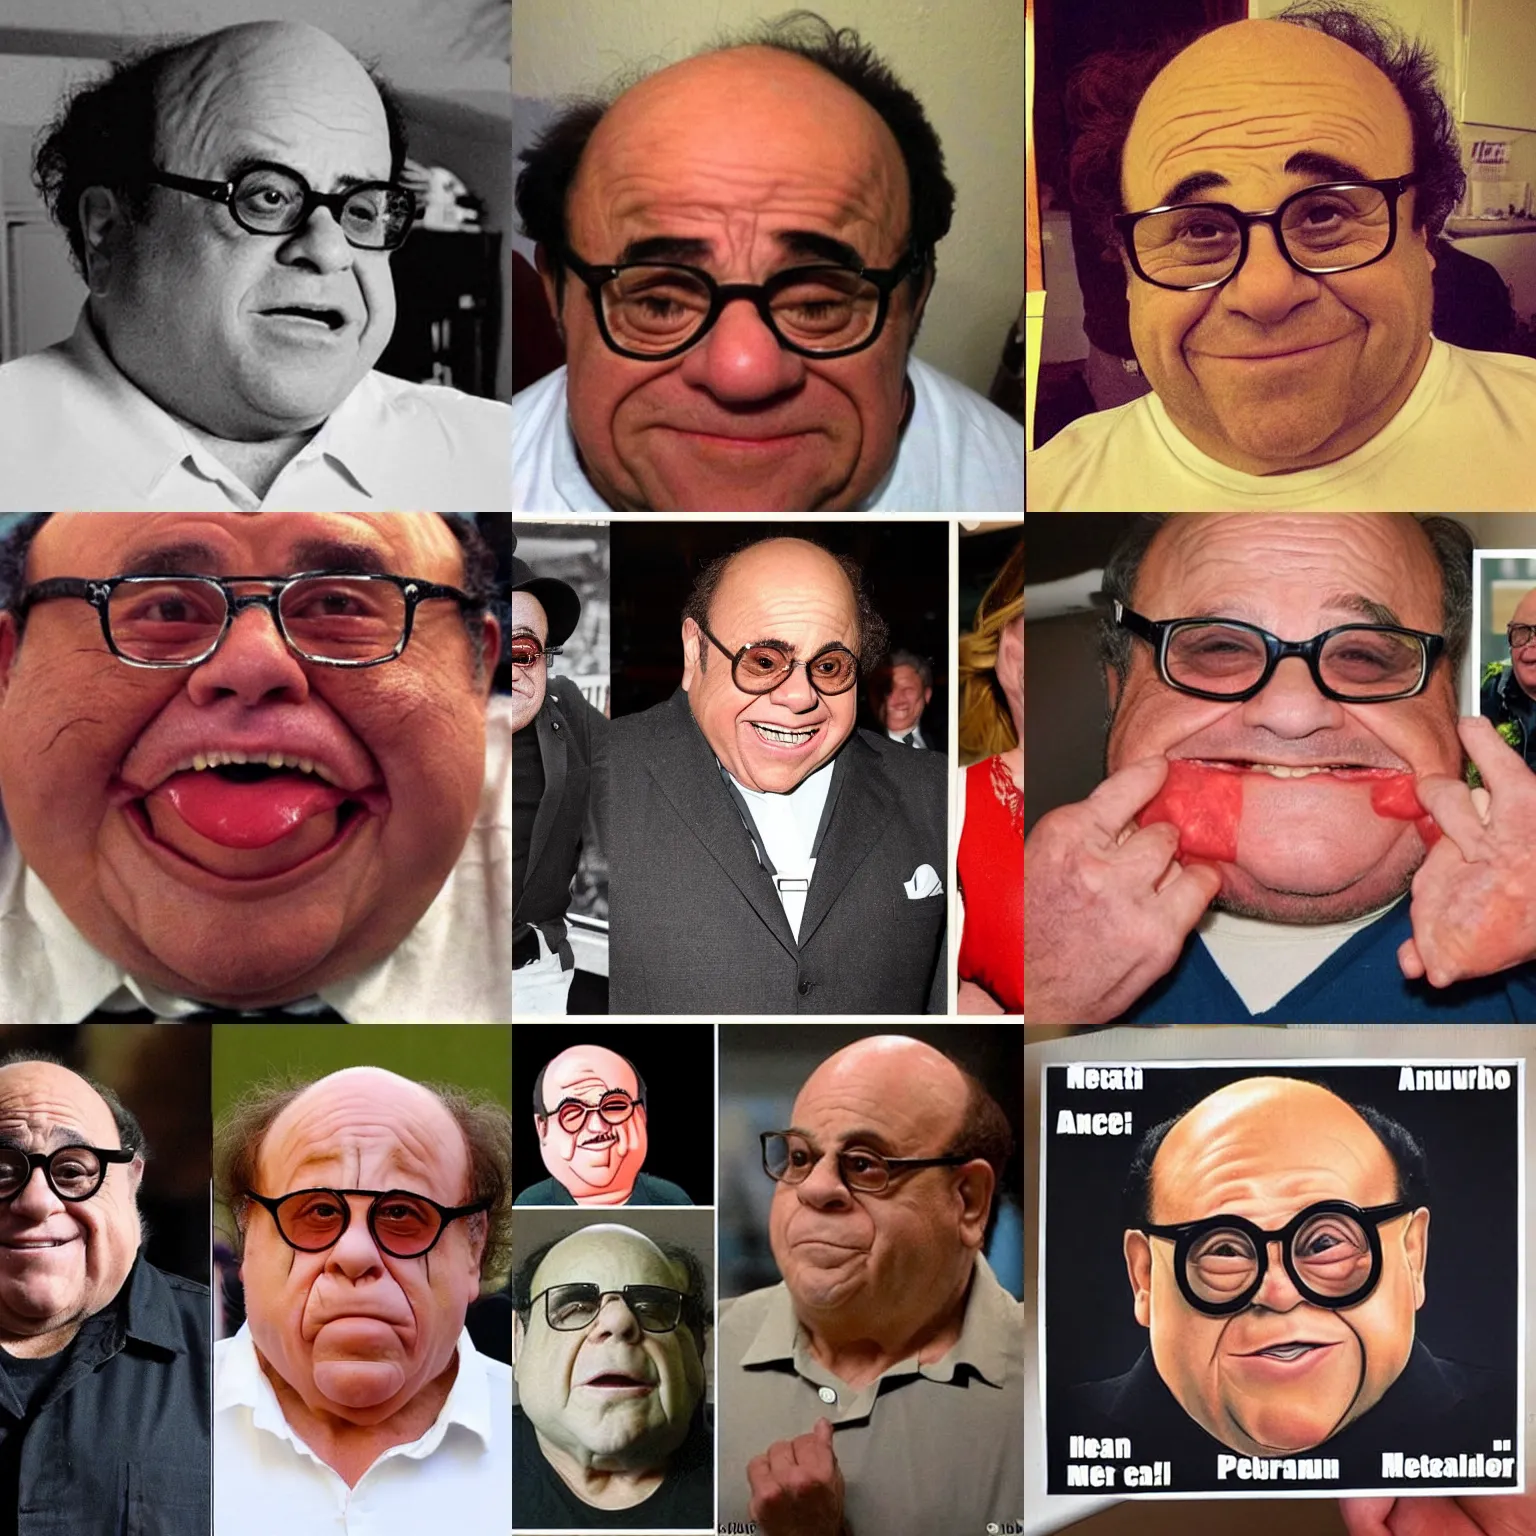 Prompt: meatthat looks like danny devito's face